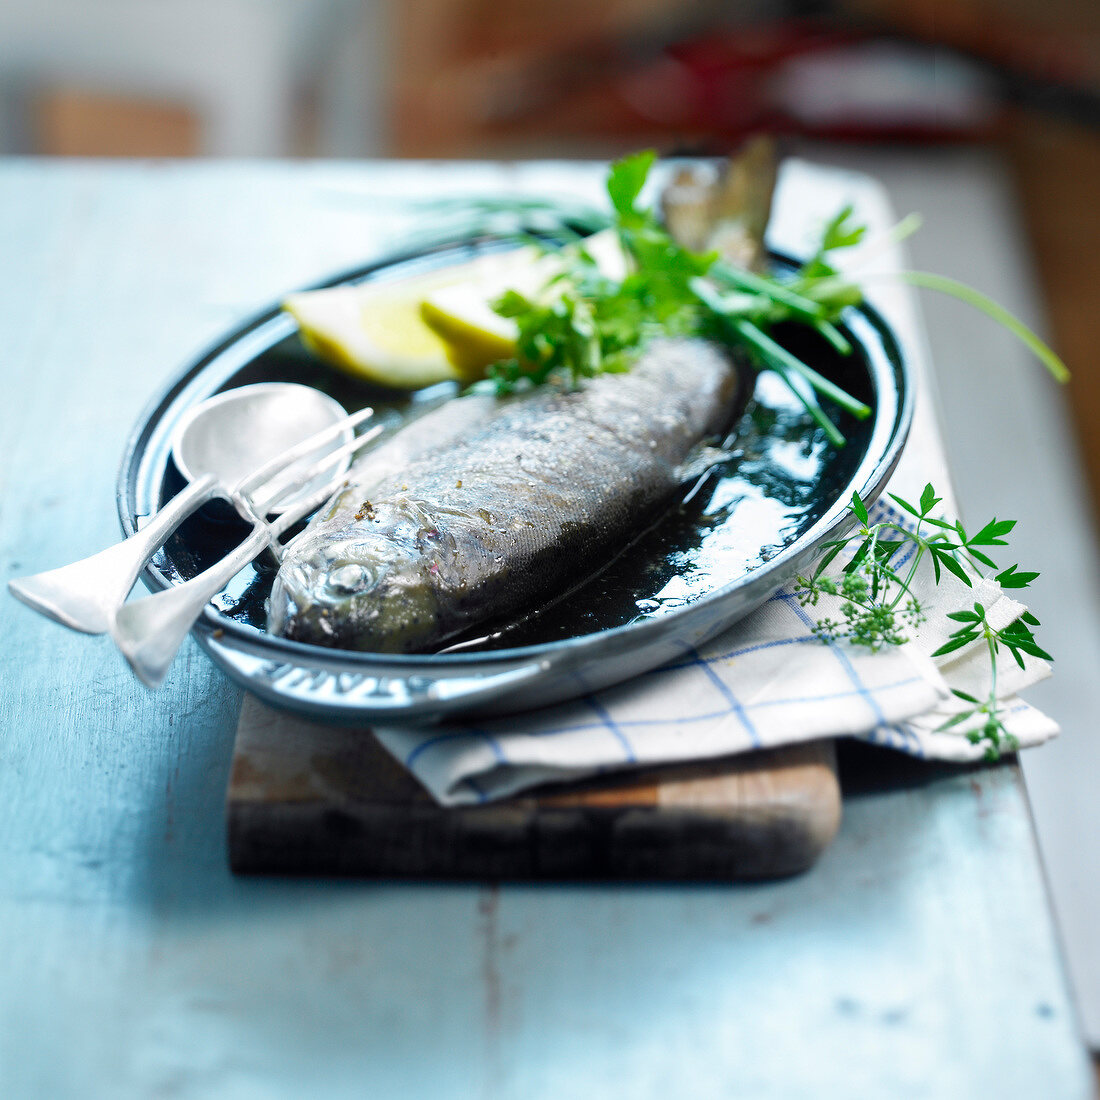 Roast trout with herbs